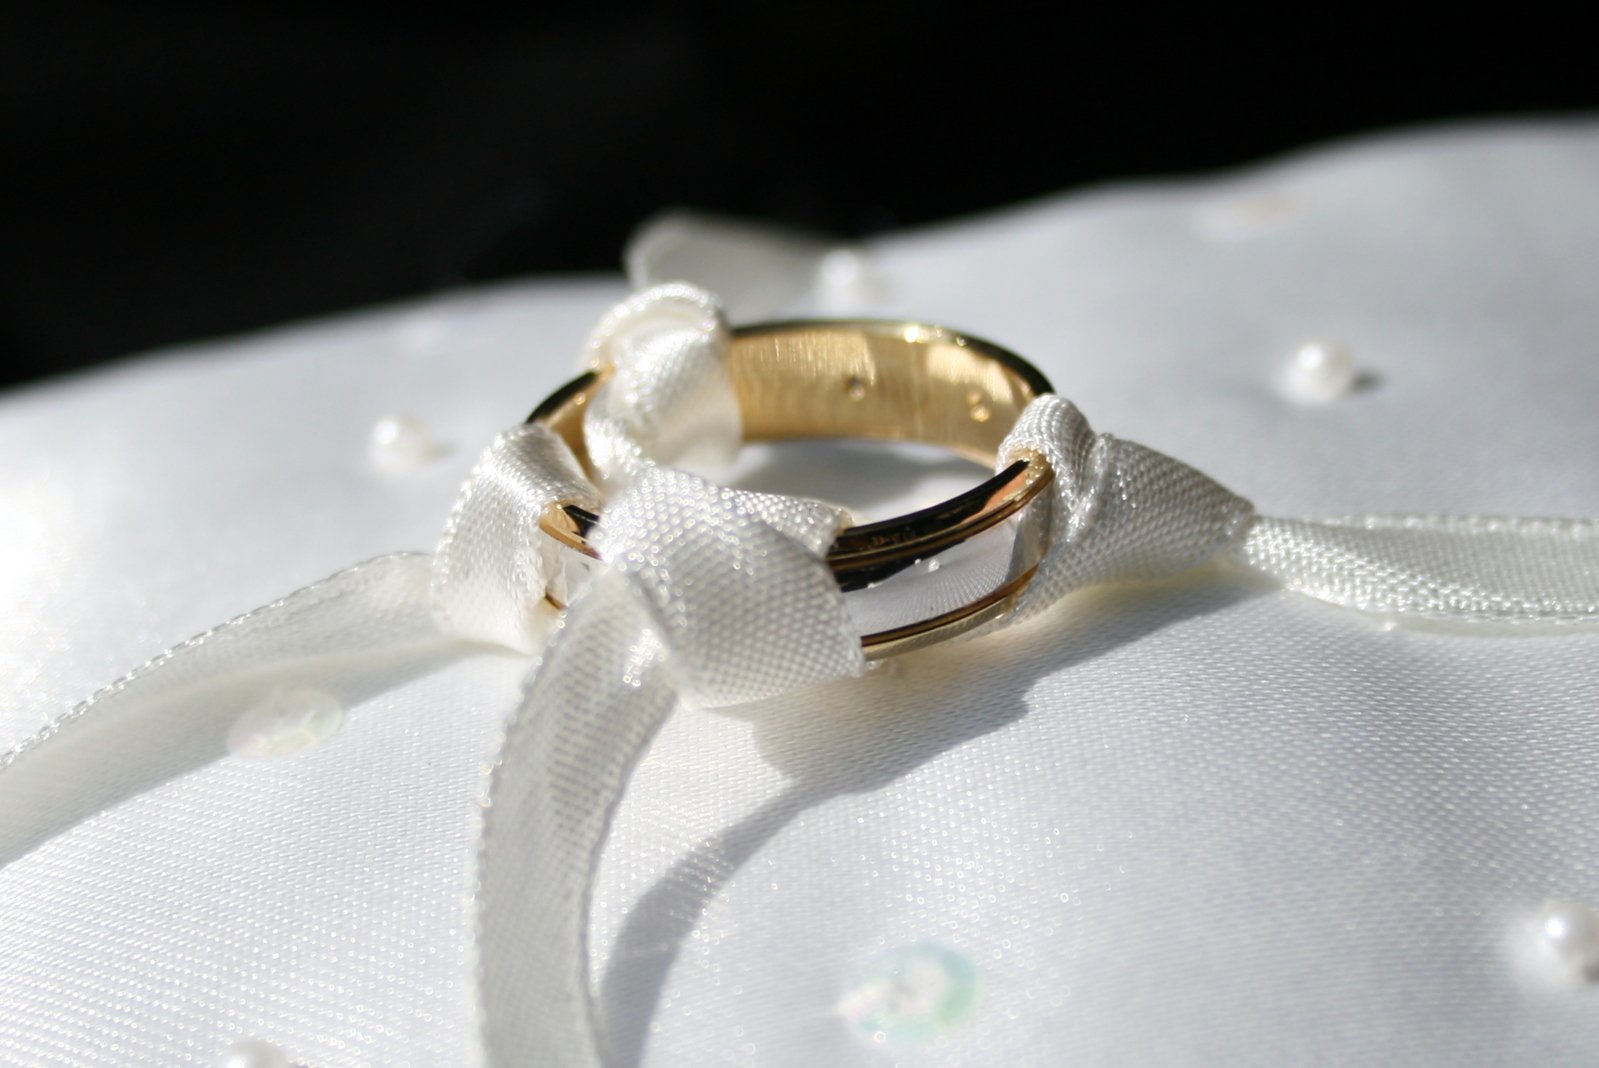 two wedding rings with bows are on top of a white fabric